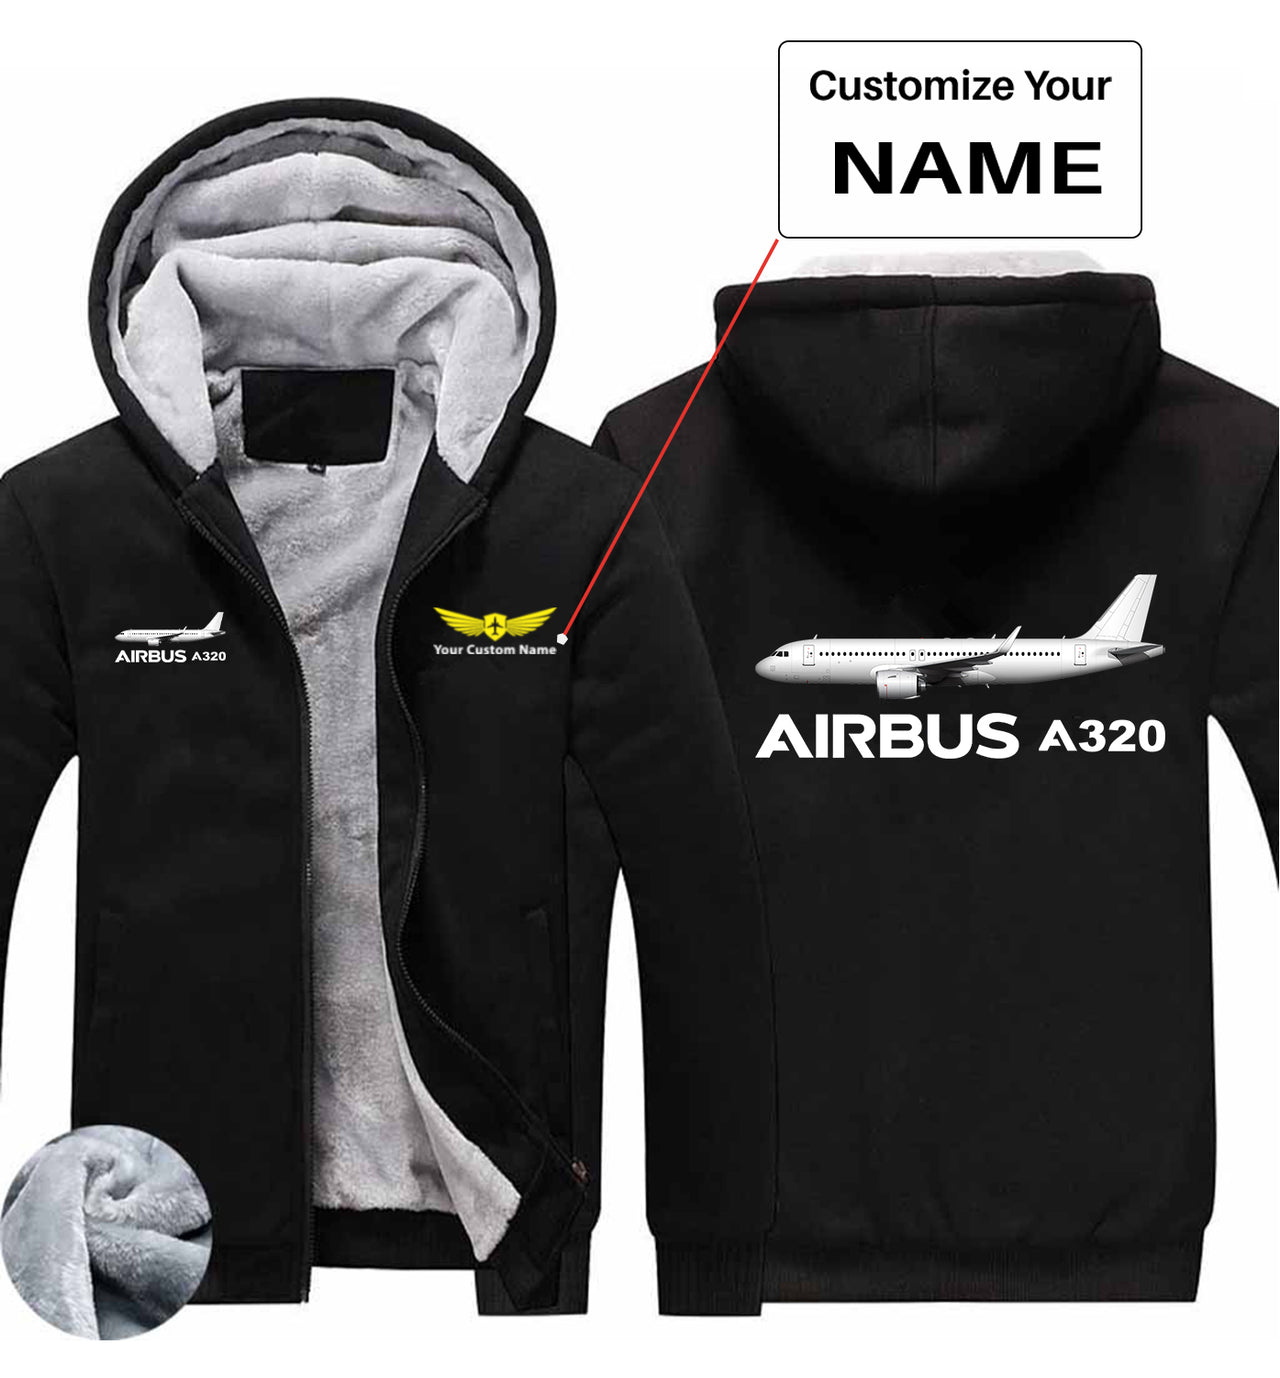 The Airbus A320 Designed Zipped Sweatshirts